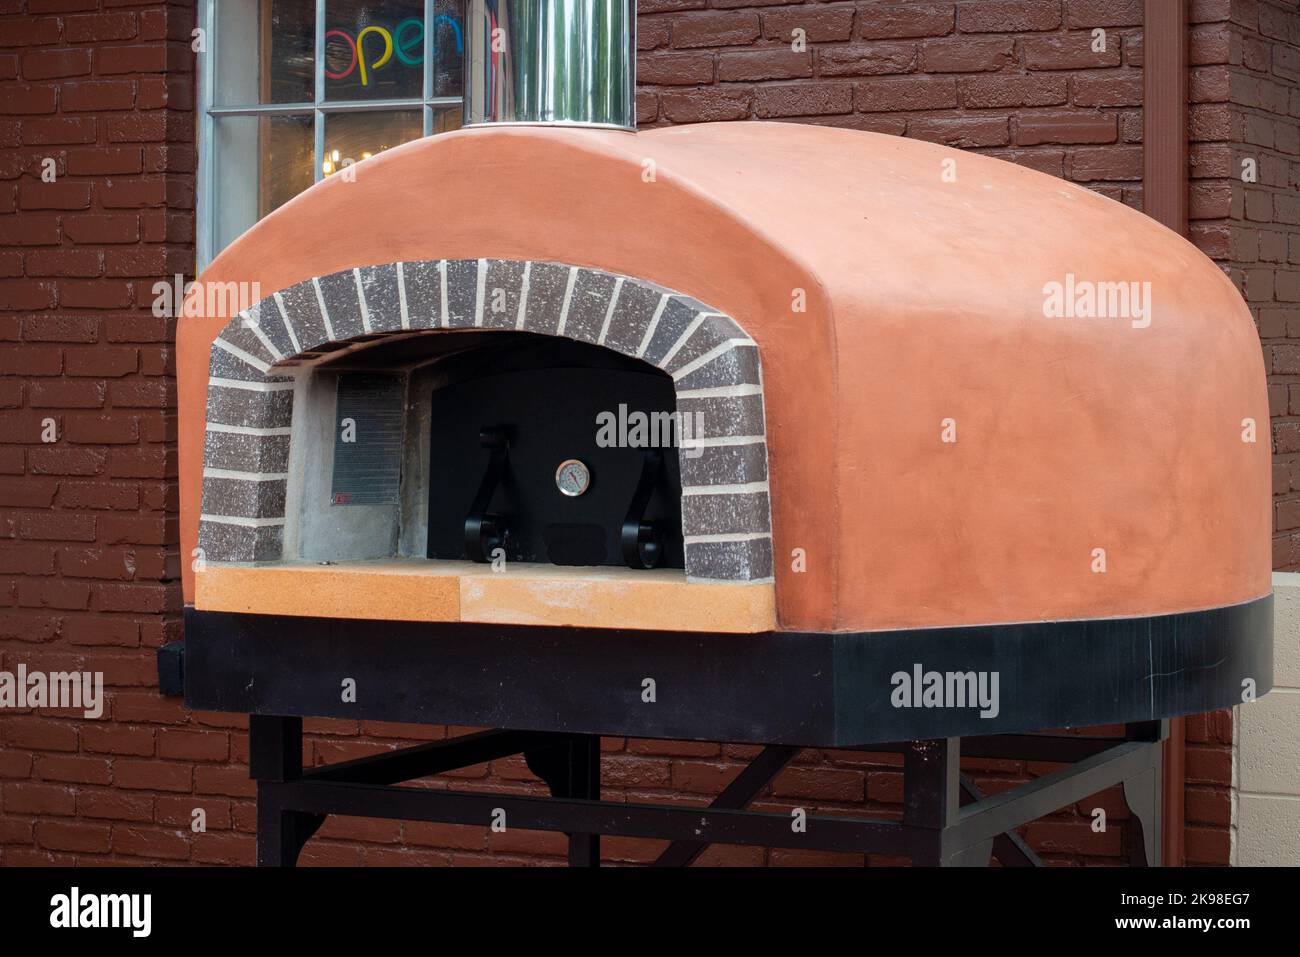 An exterior of a gas clay pizza oven on black metal legs on a restaurant patio. There are bricks surrounding the opening of the Italian equipment. Stock Photo